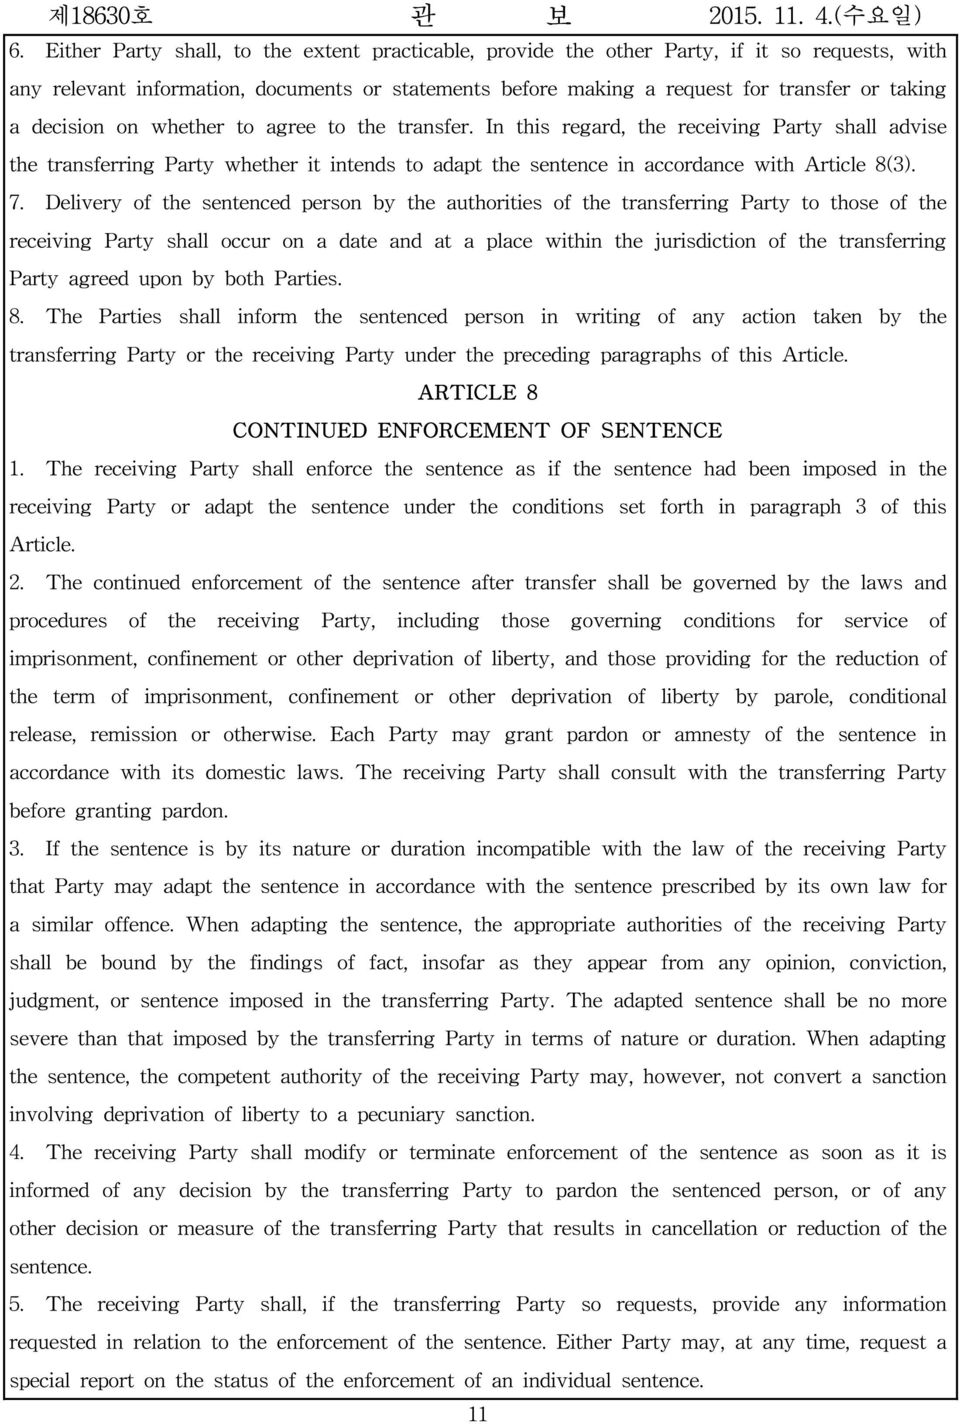 Delivery of the sentenced person by the authorities of the transferring Party to those of the receiving Party shall occur on a date and at a place within the jurisdiction of the transferring Party